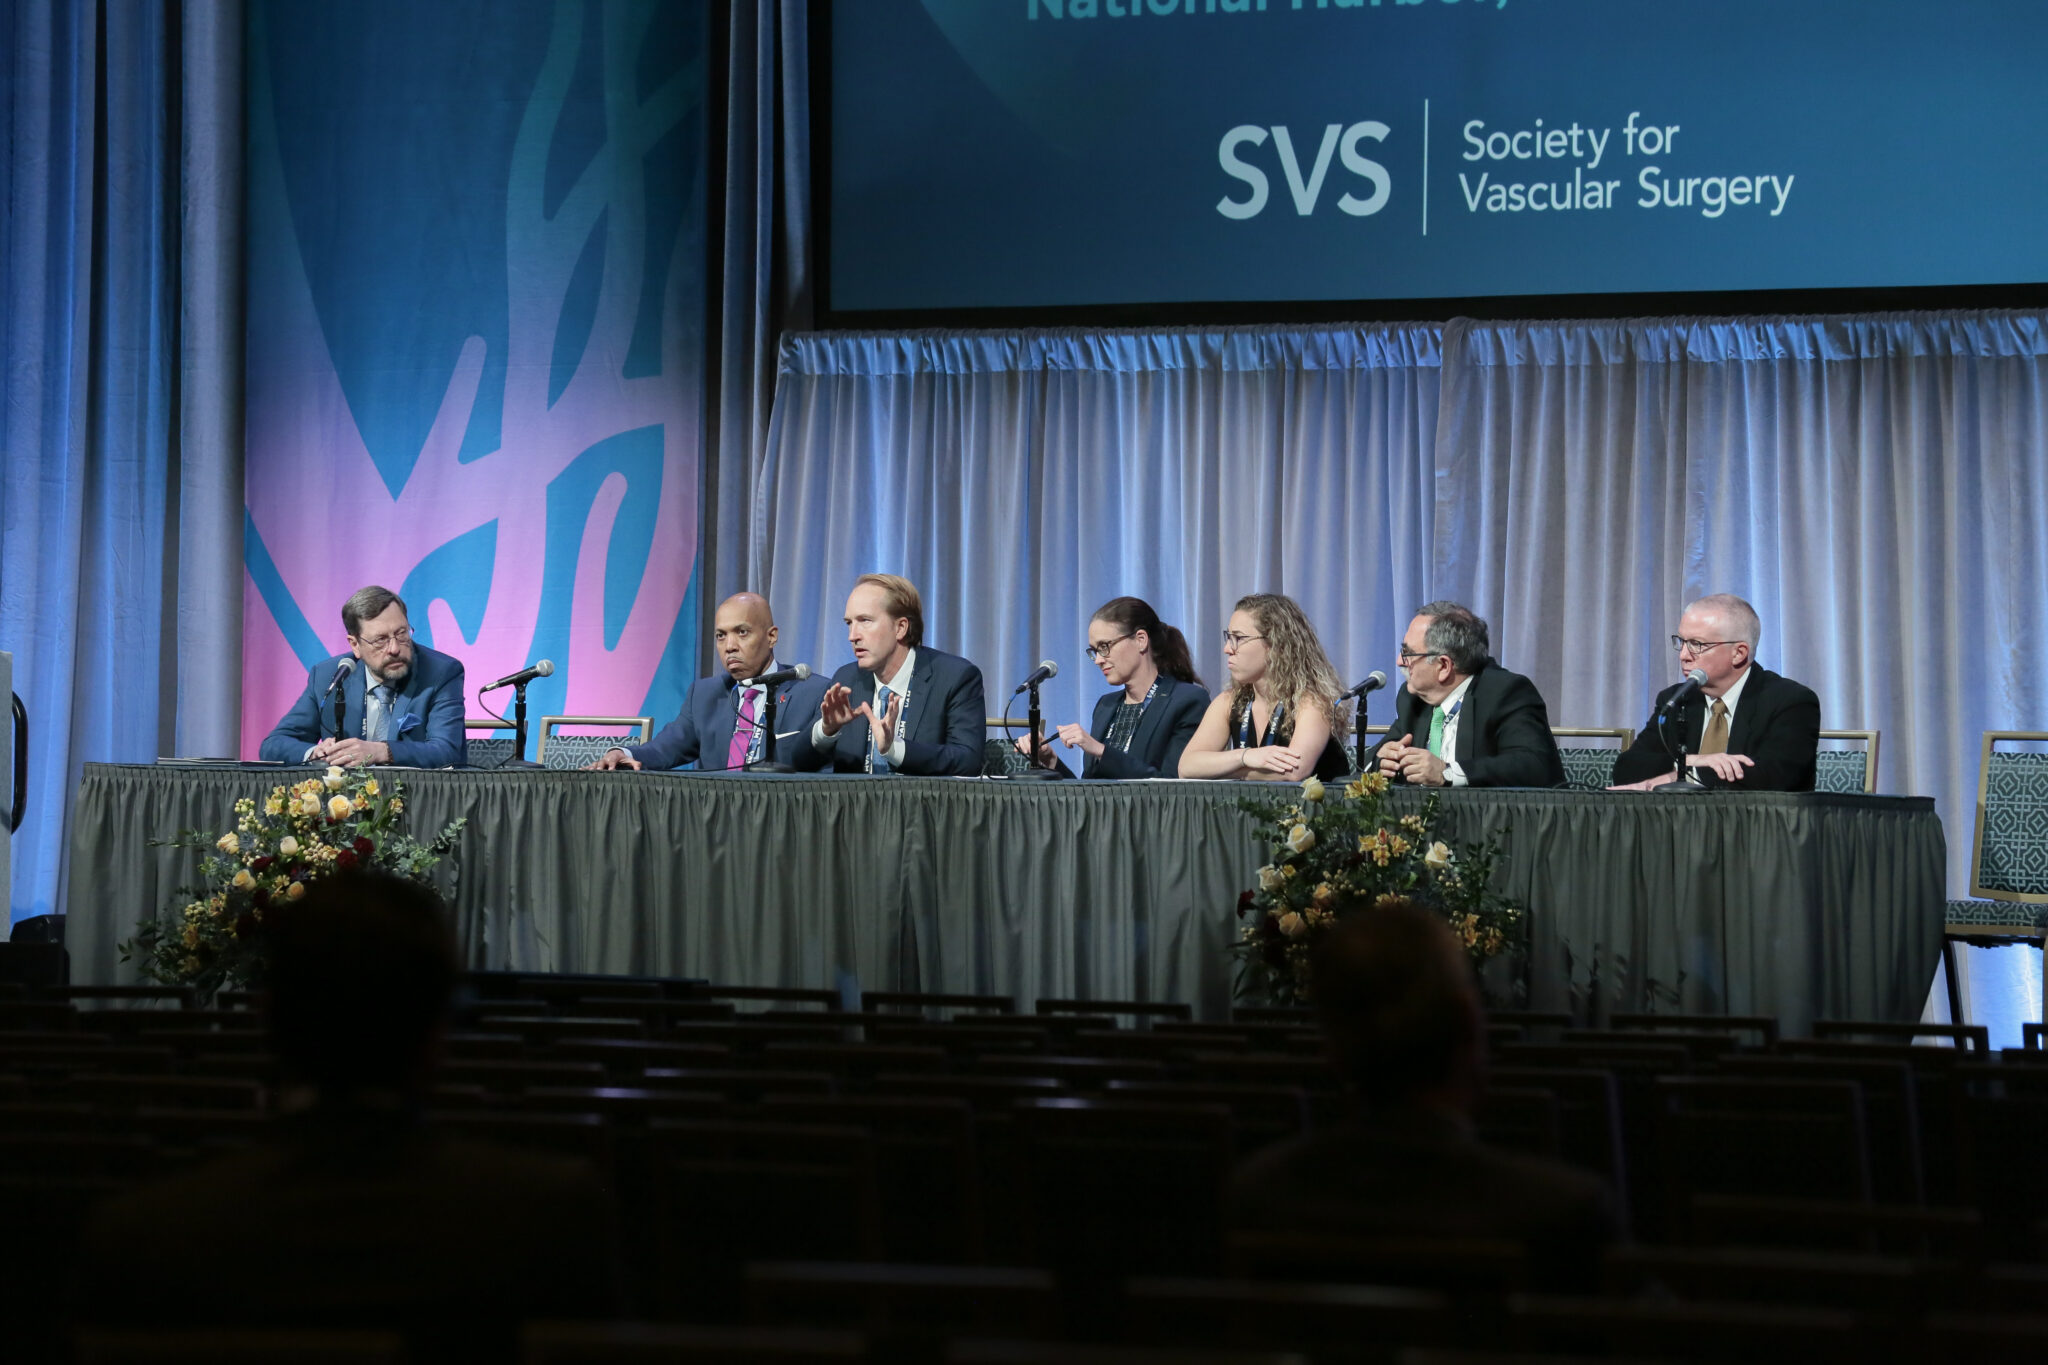 Crawford panel looks at opportunities to plug and extend vascular surgery workforce pipeline